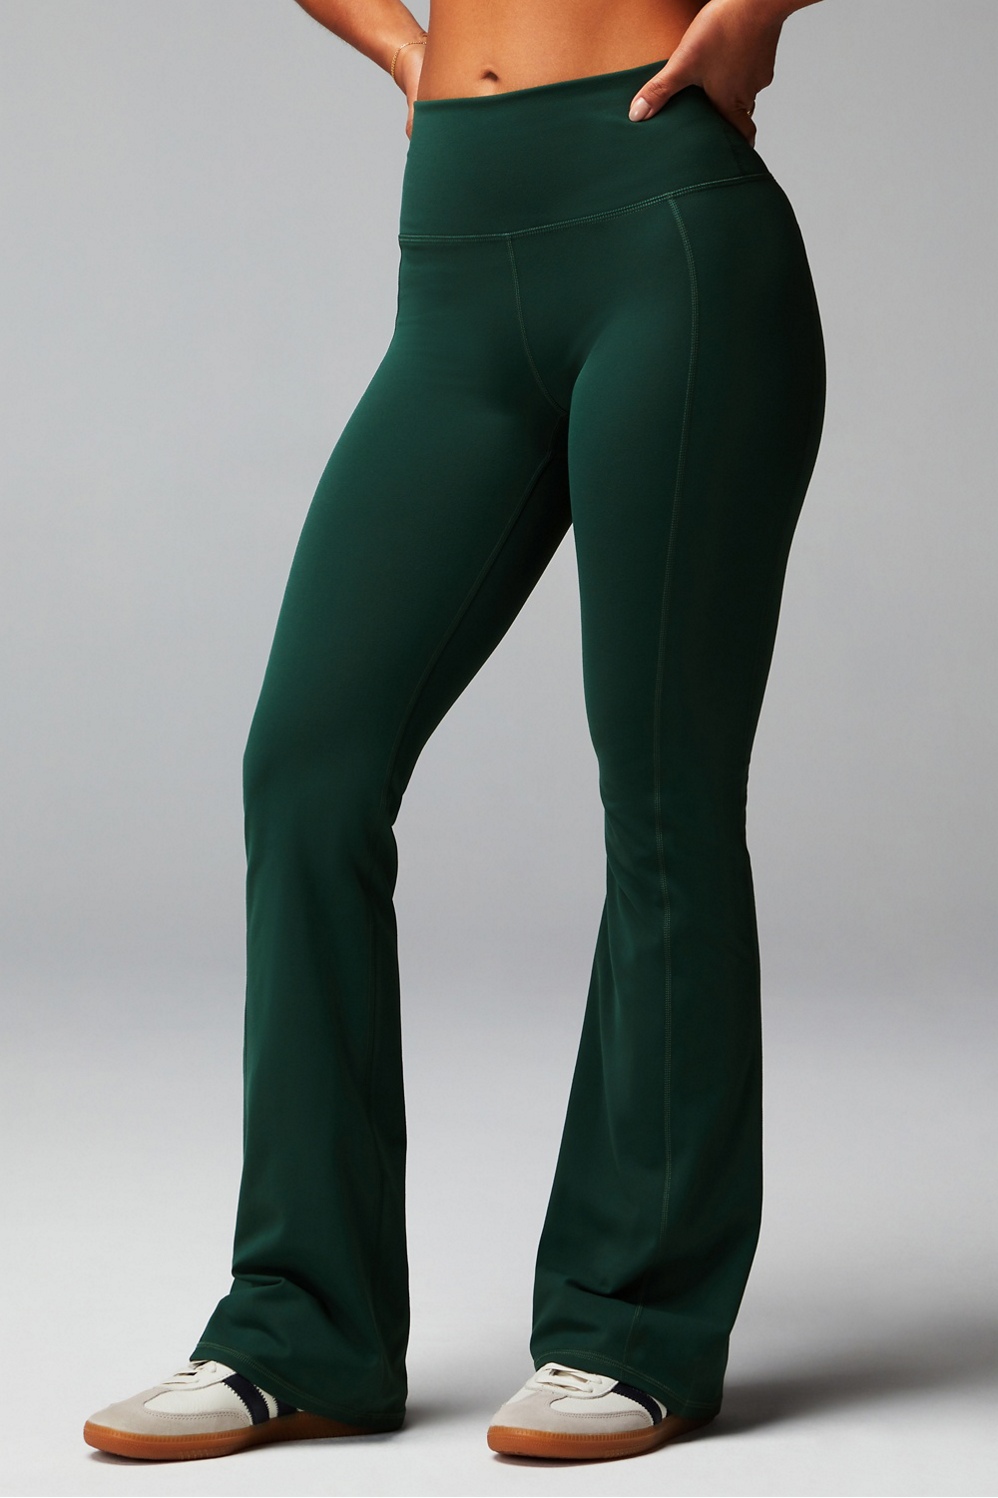 Women's Yoga Flare High Waisted Pants - Breathable Material To